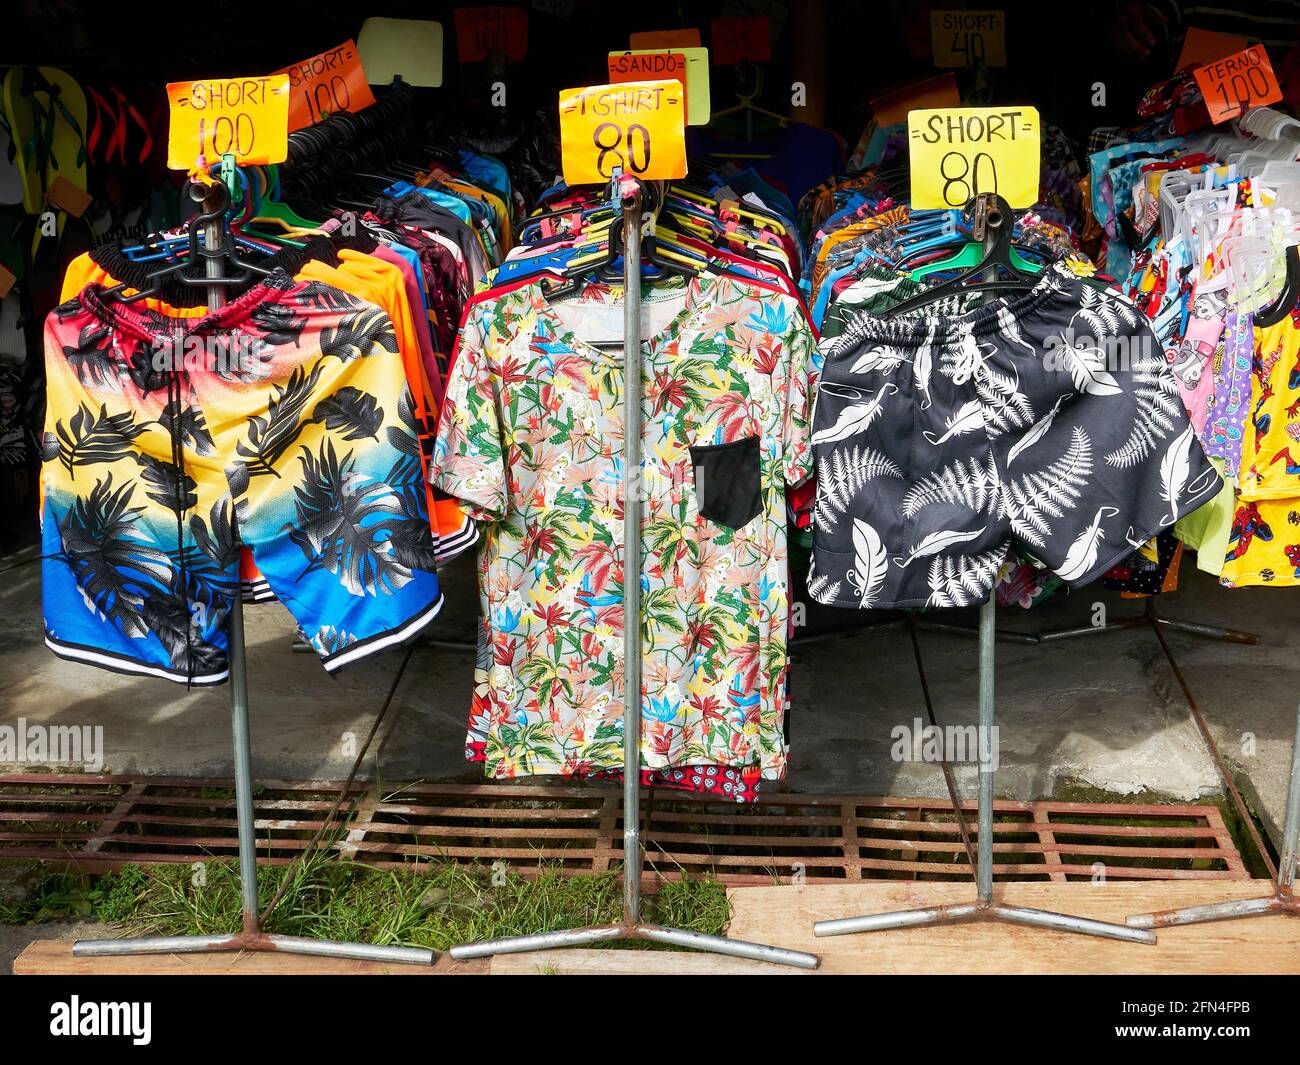 Several display stands with hangers full of colorful clothes for sale in a stall in the Philippines, a common sight during the covid pandemic times Stock Photo